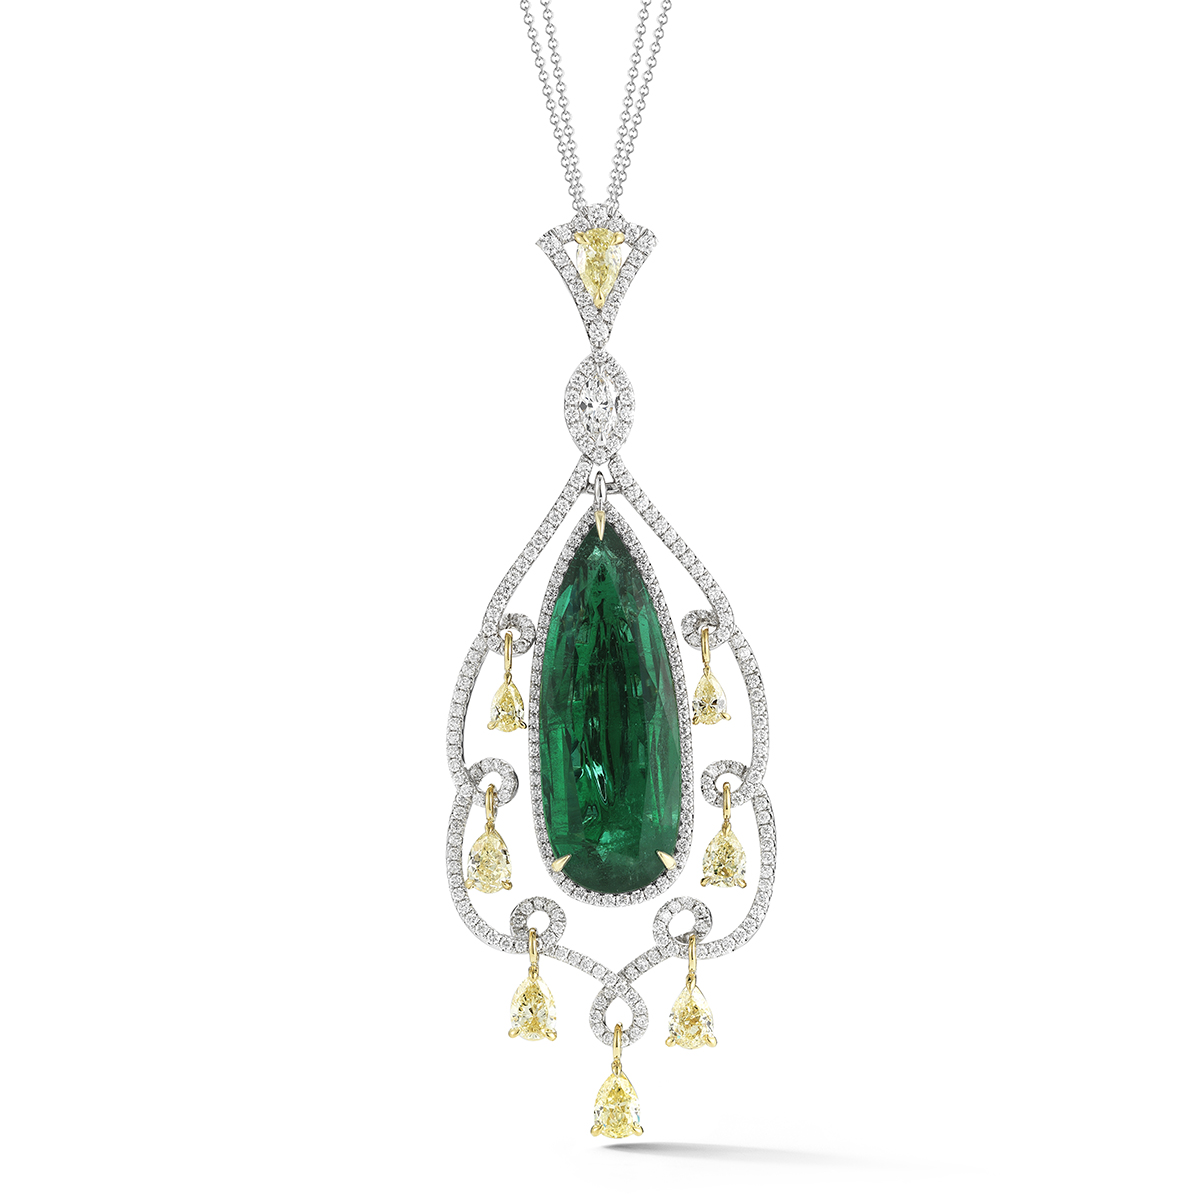 EMERALD NECKLACE WITH NATURAL S. SEA PEARL AND DIAMONDS